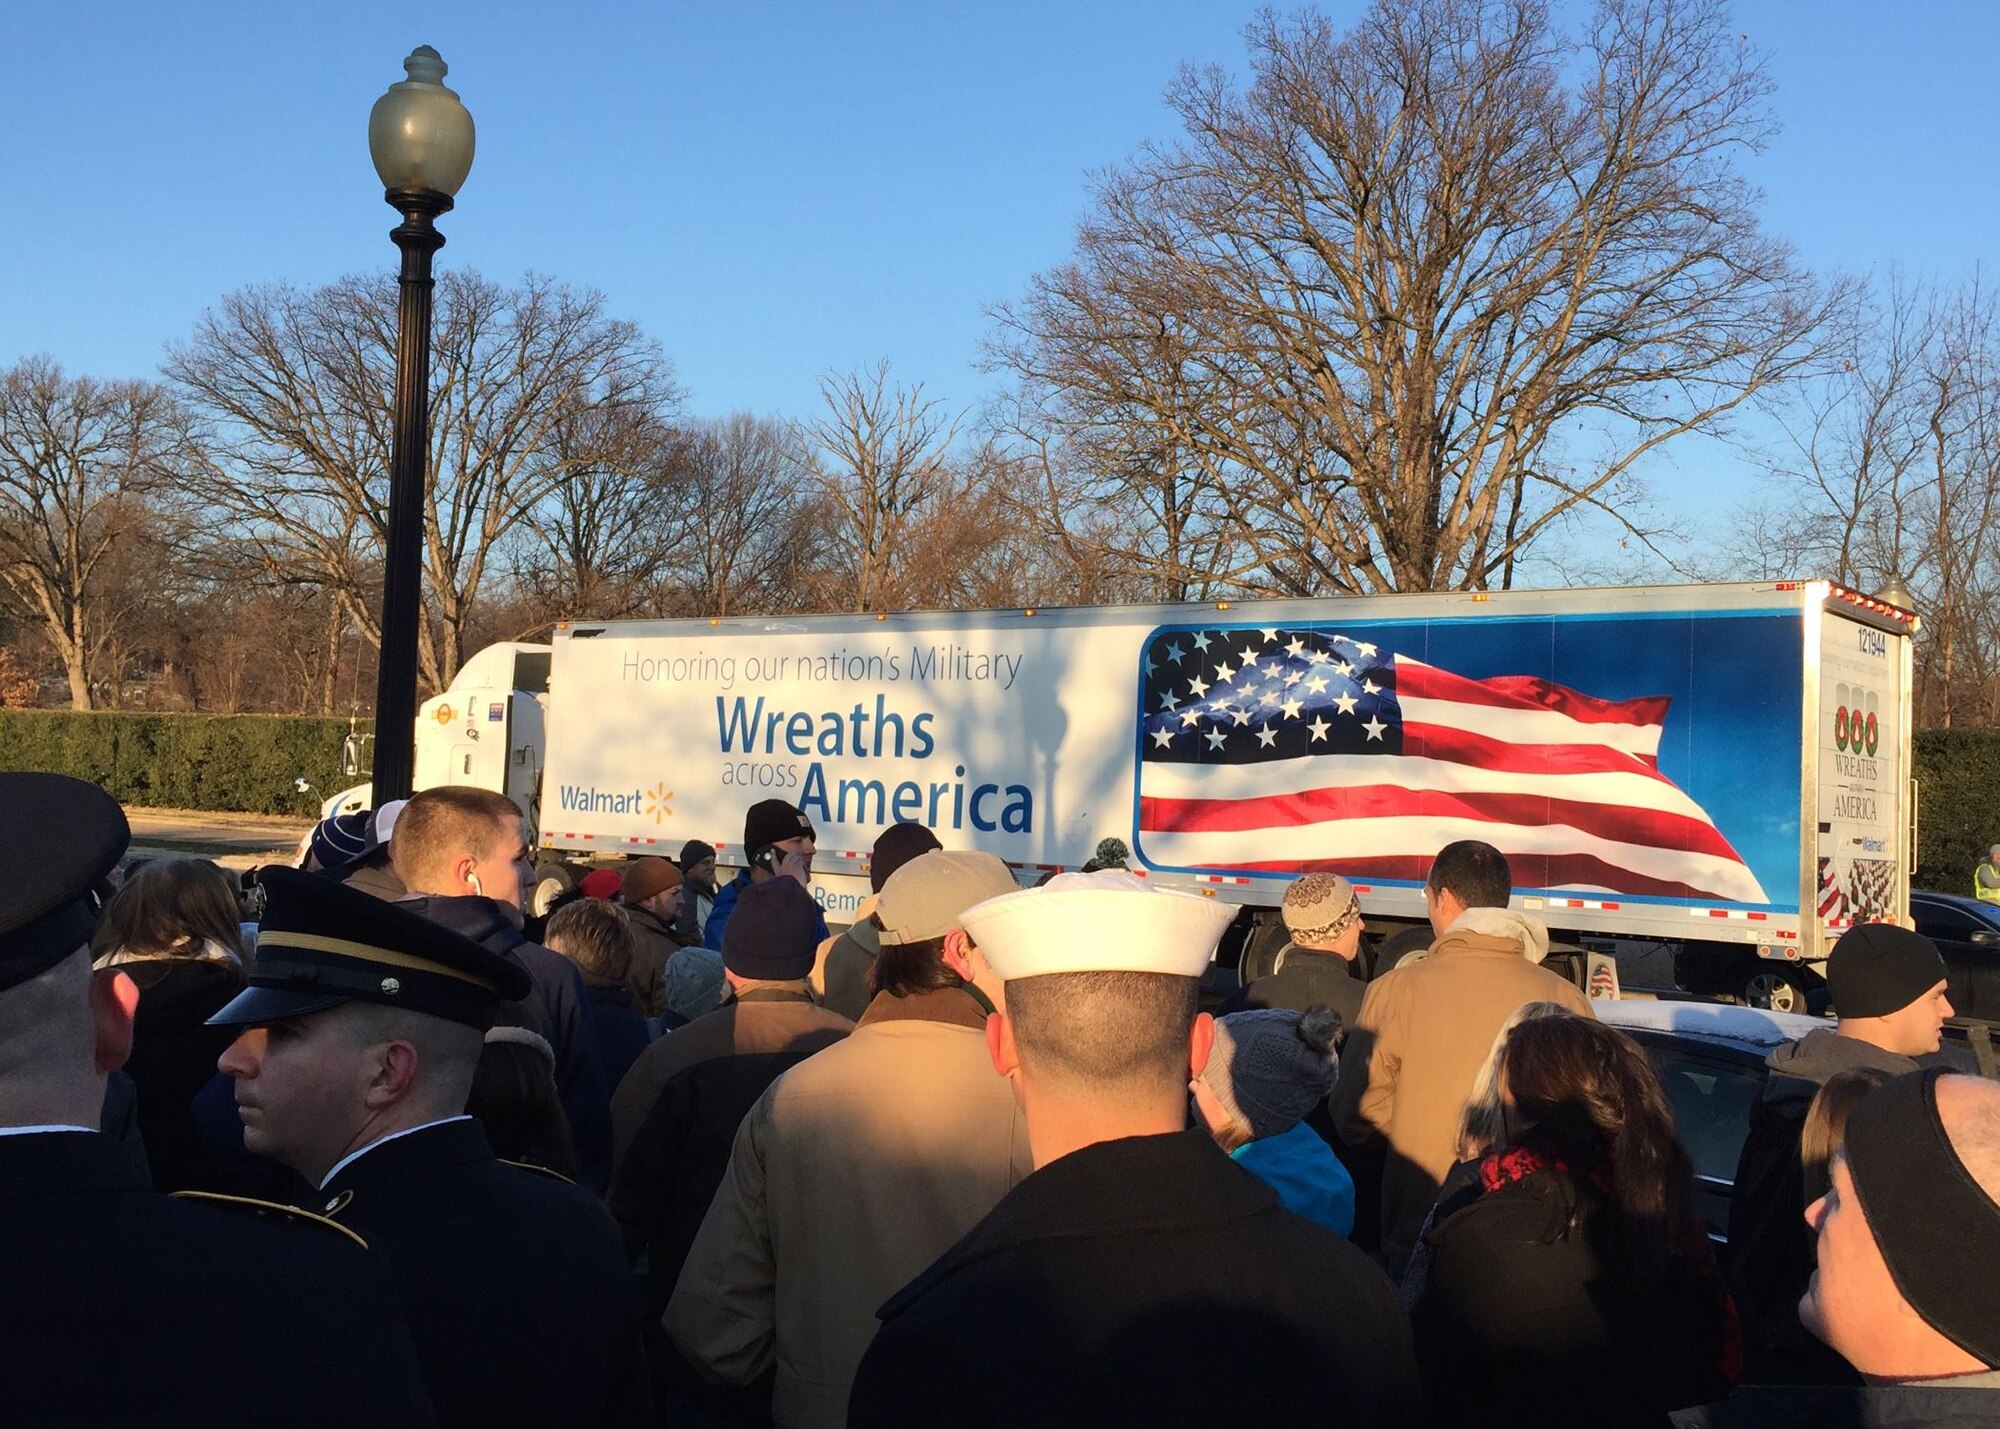 After a week’s-long journey from Harrington, Maine, to Arlington, Va., a truckload of wreaths from the Wreaths Across America convoy arrives Dec. 16, 2017, at Arlington National Cemetery. A diverse group of volunteers welcomed the wreath-carrying convoy early Saturday morning. (U.S. Air Force photo by 2nd Lt. Natasha O. Mosquera)